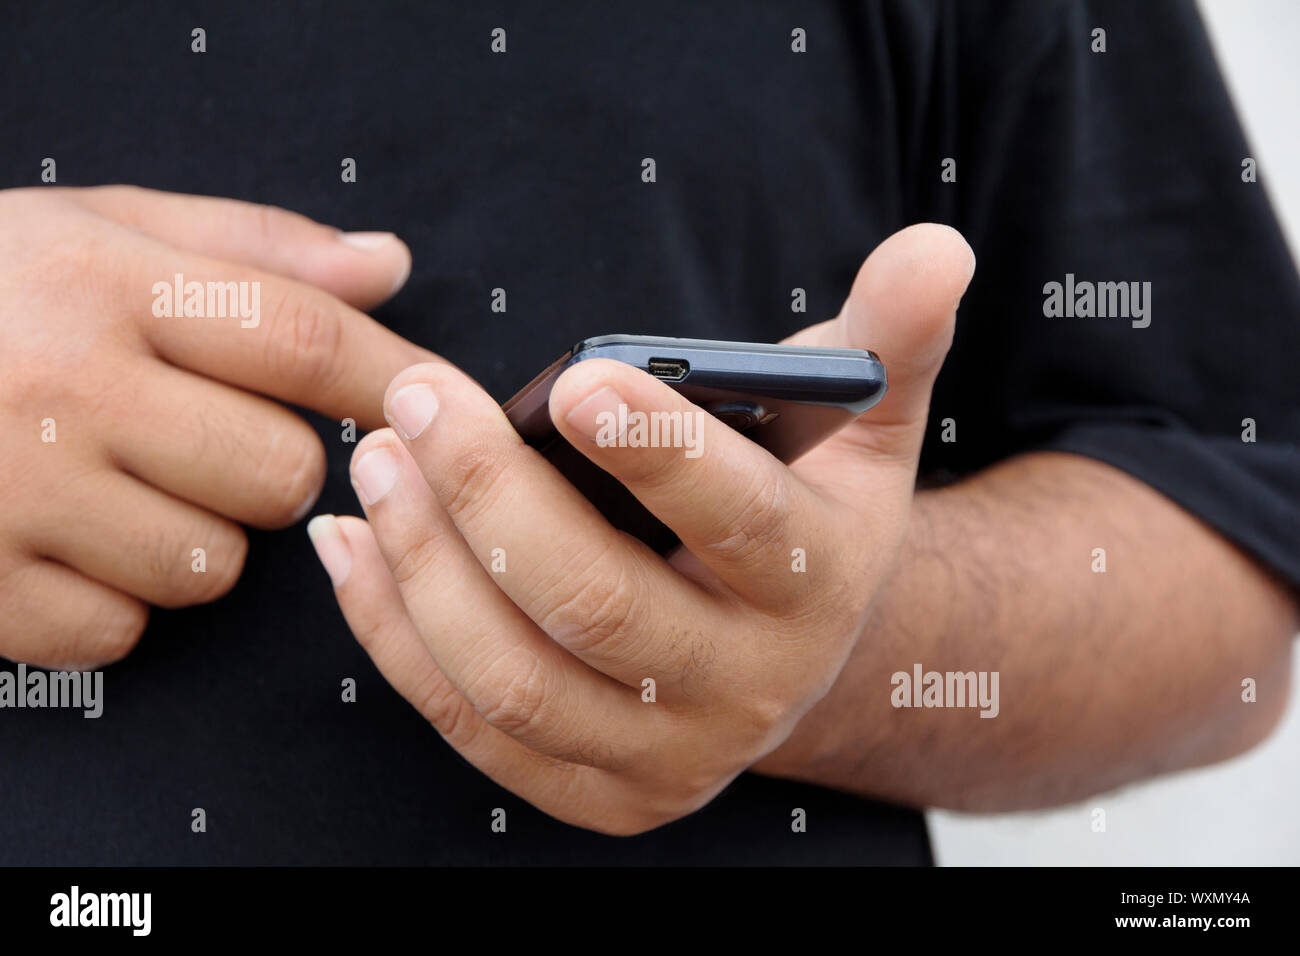 man with smart phone Stock Photo